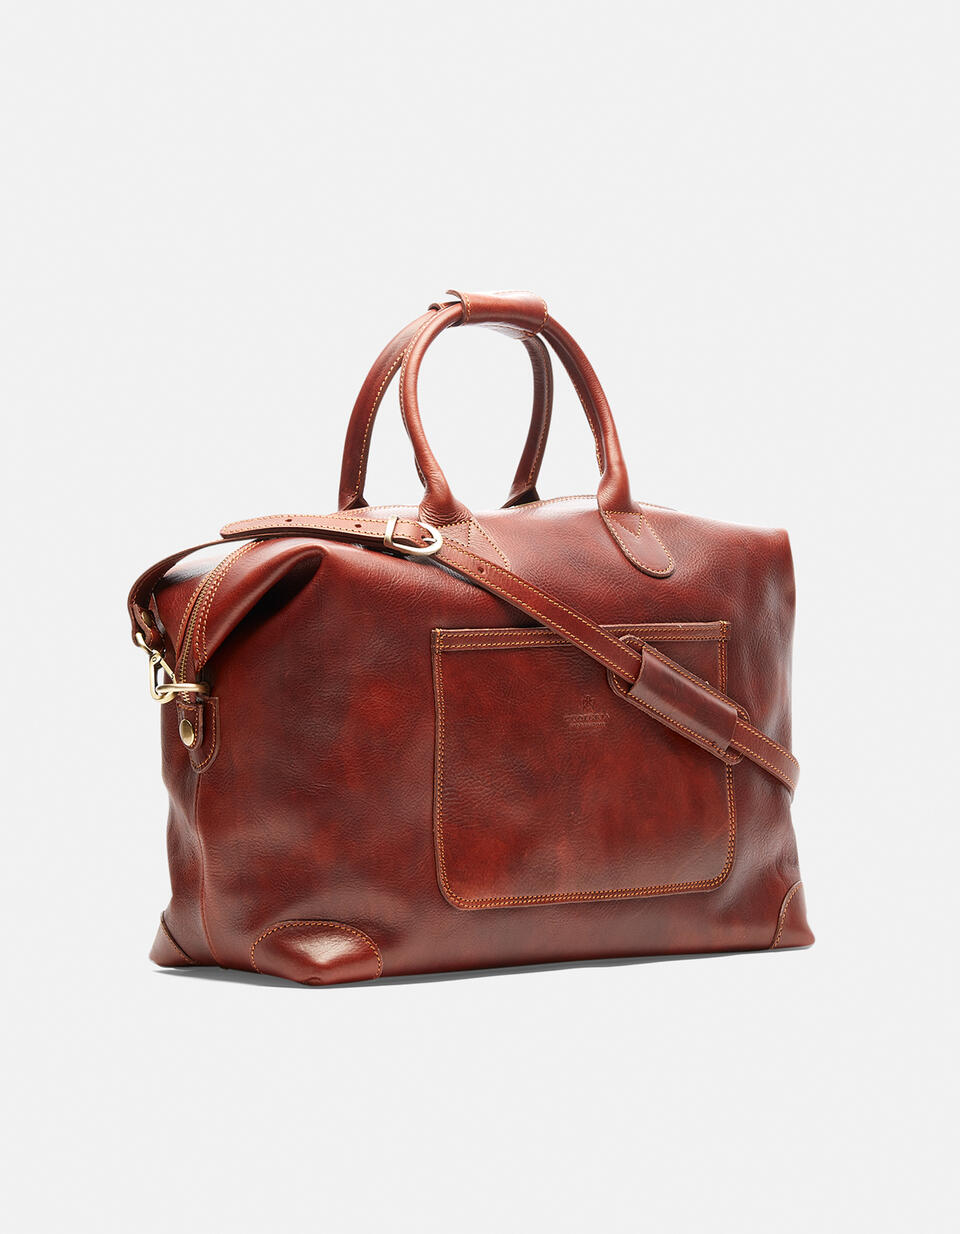 Oxford weekender - Luggage | TRAVEL BAGS  - Luggage | TRAVEL BAGSCuoieria Fiorentina